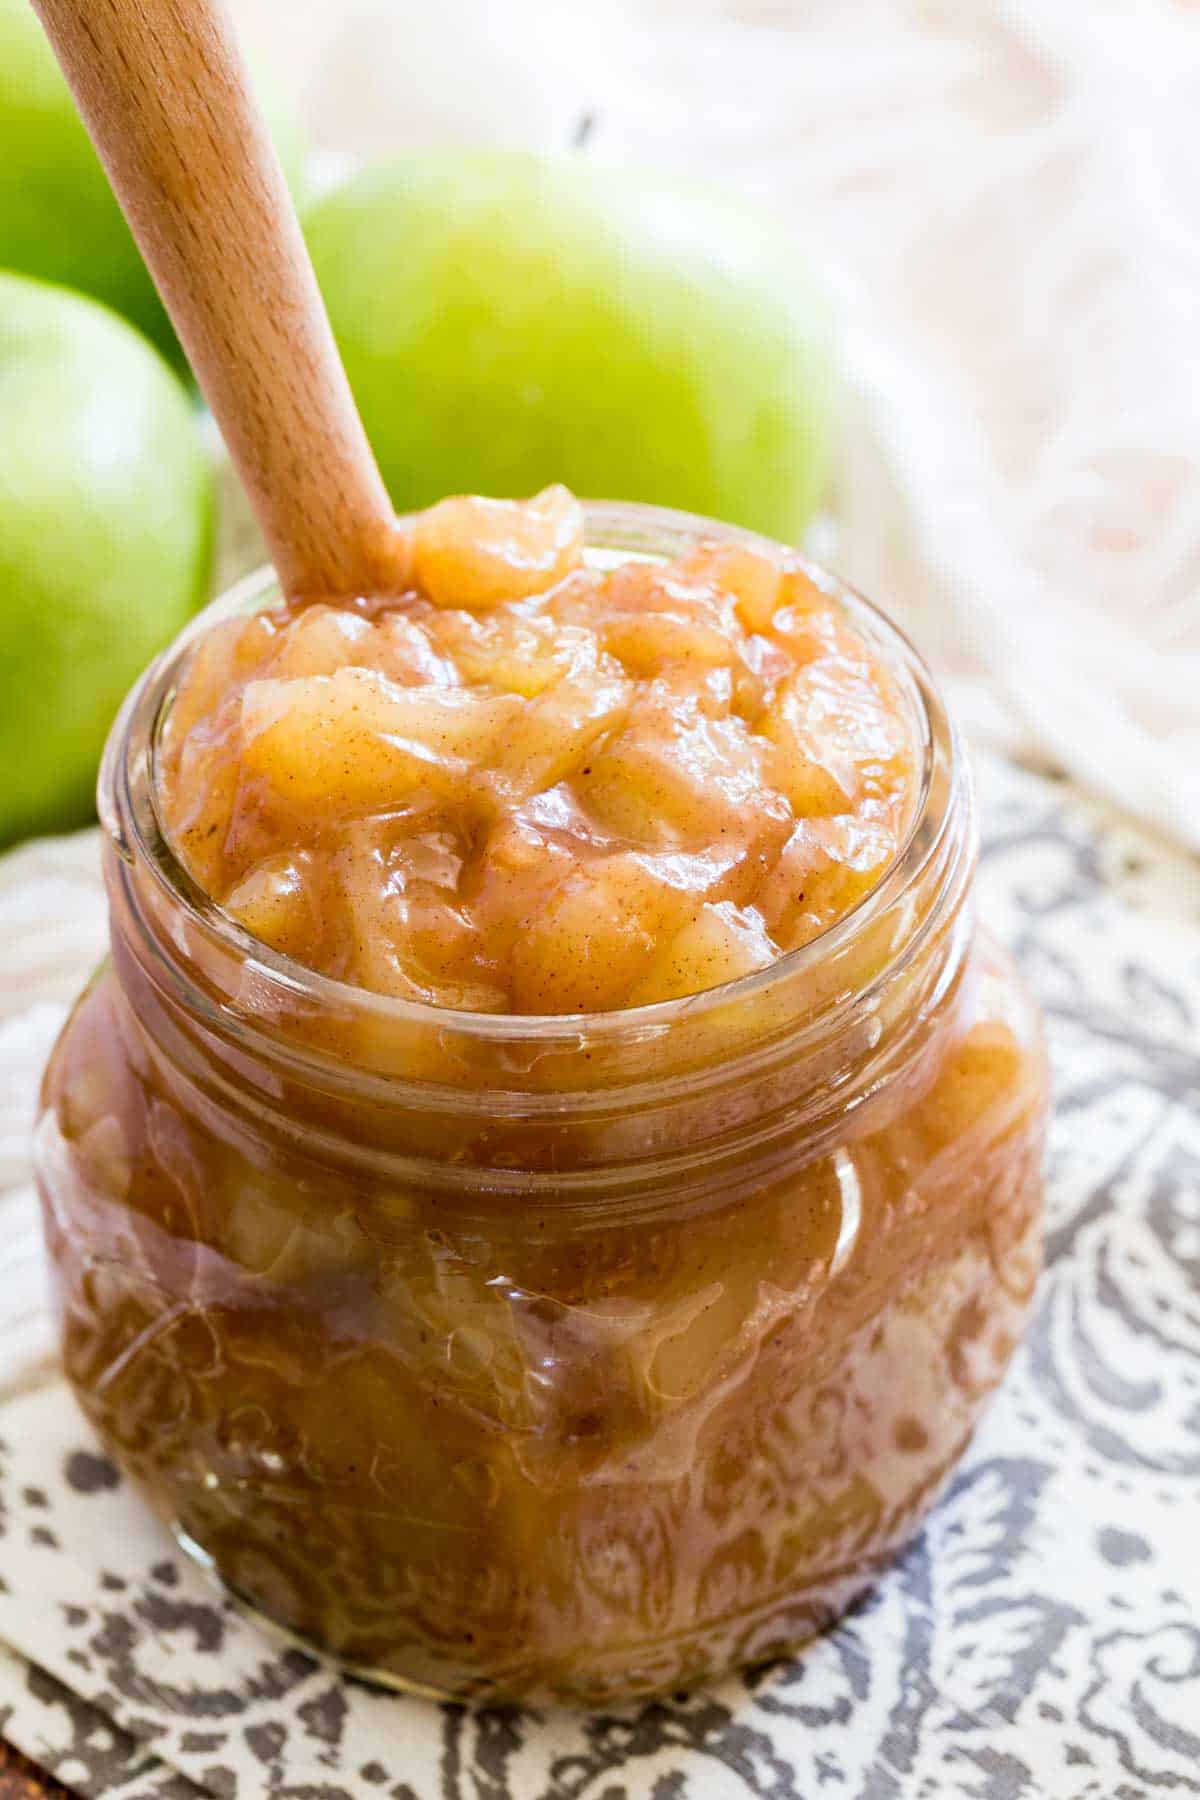 A jar of apple pie filling with a wooden spoon.